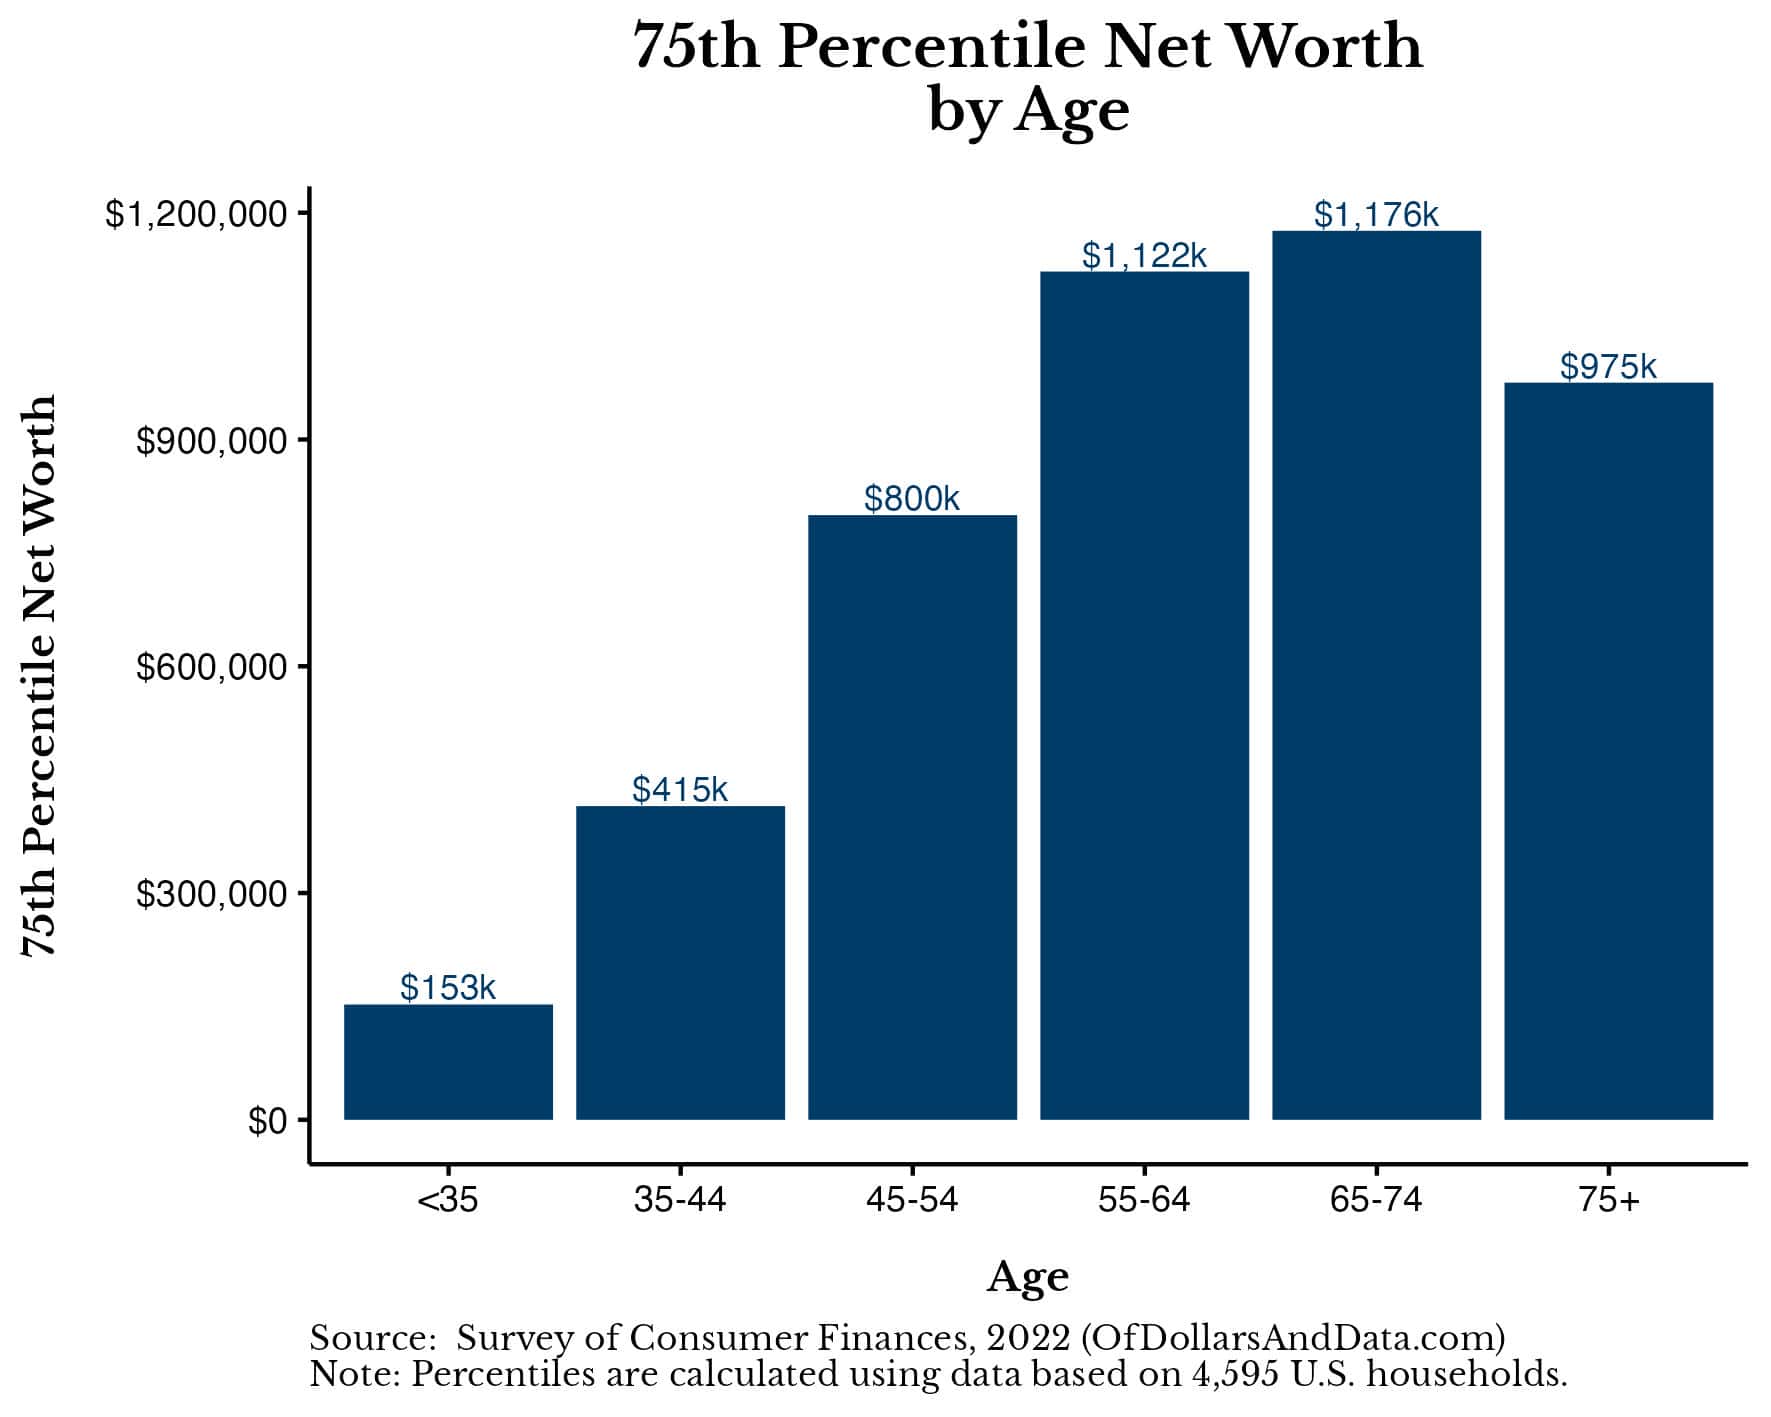 Chart showing the 75th percentile net worth by age in the Survey of Consumer Finances 2022 data from the Federal Reserve.